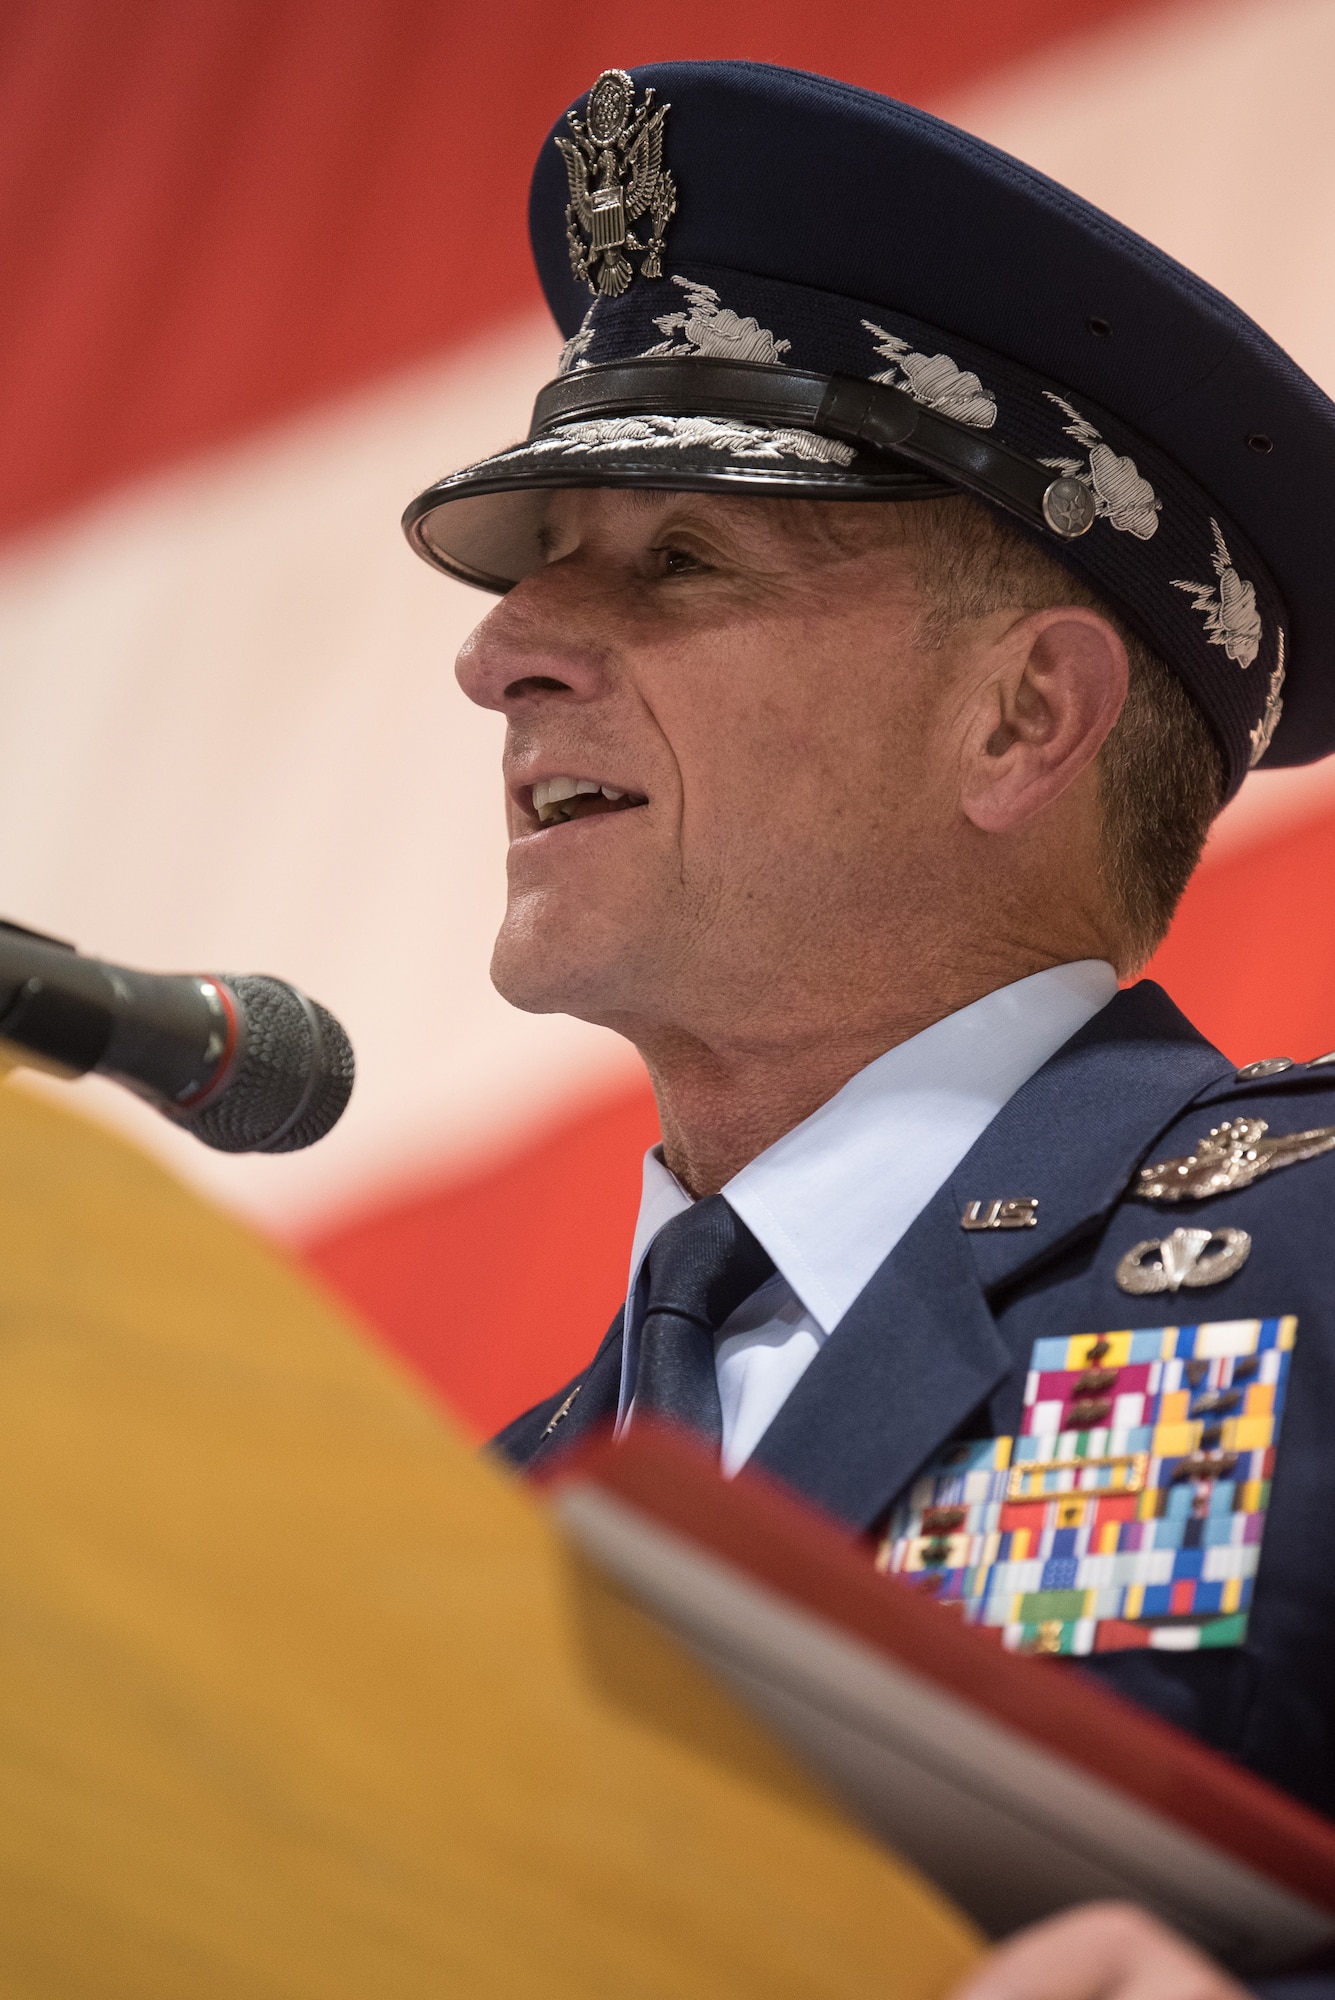 Air Force Chief of Staff Gen. David L. Goldfein speaks to 400 Airmen and family members during an award ceremony at the Kentucky Air National Guard Base in Louisville, Ky, Aug.13, 2019. At the ceremony, Goldfein presented Tech. Sgt. Daniel Keller, a combat controller in the 123rd Special Tactics Squadron, with the Air Force Cross, which Keller earned for valor on the battlefield in Afghanistan. (U.S. Air National Guard photo by Staff Sgt. Joshua Horton)